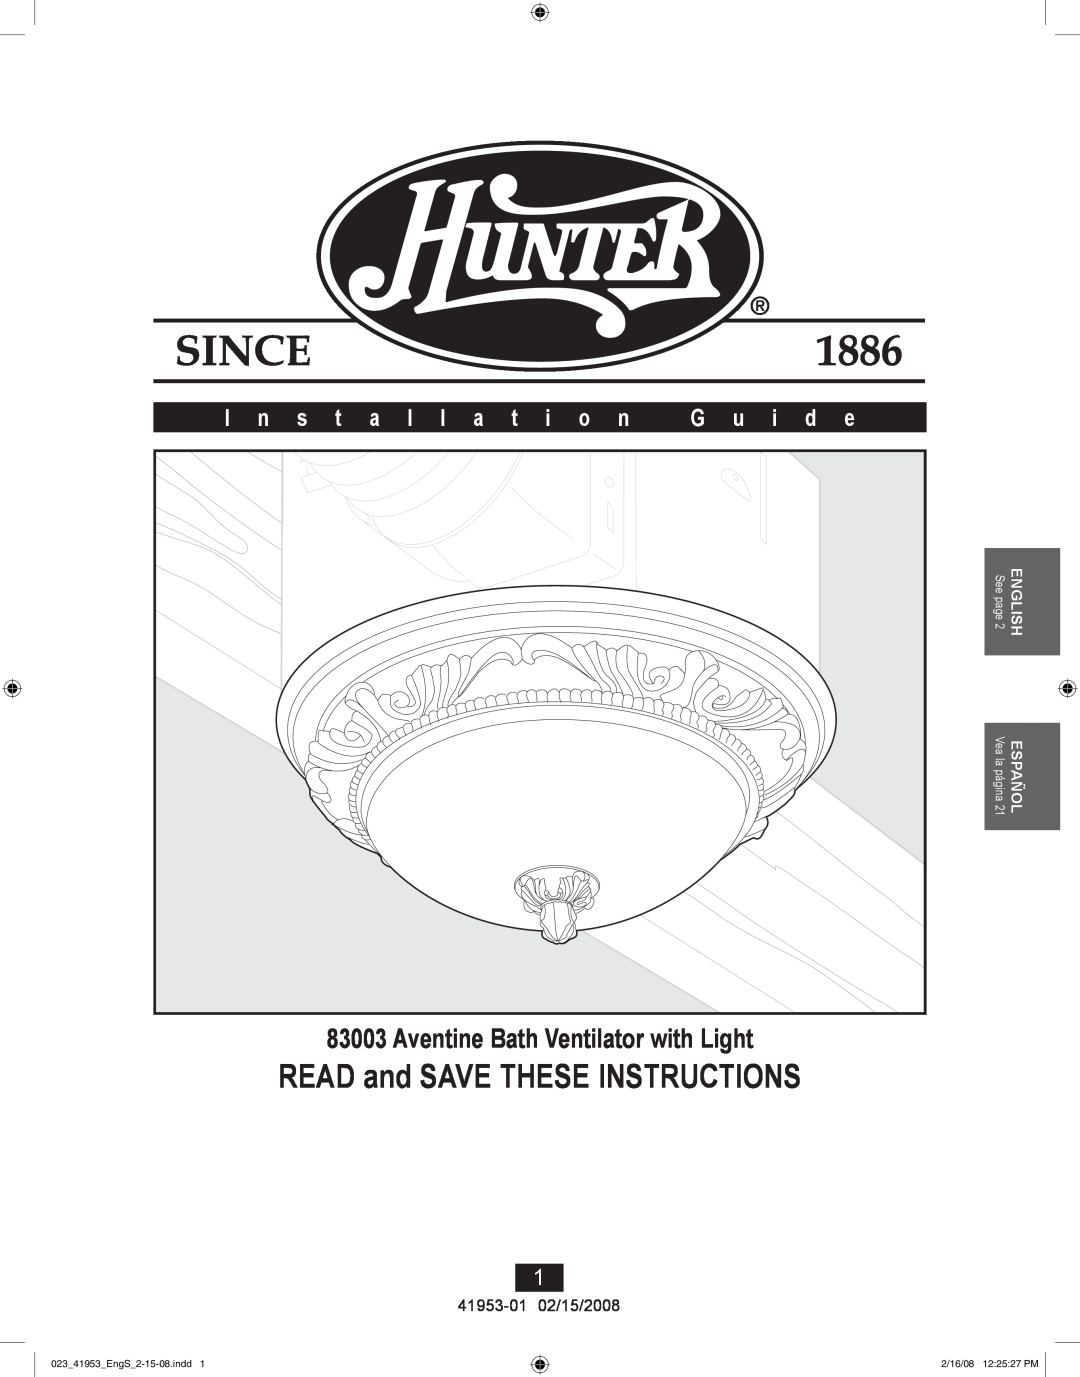 Hunter Fan 41953-01 manual READ and SAVE THESE INSTRUCTIONS, Aventine Bath Ventilator with Light, I n s t a l l a t i o n 